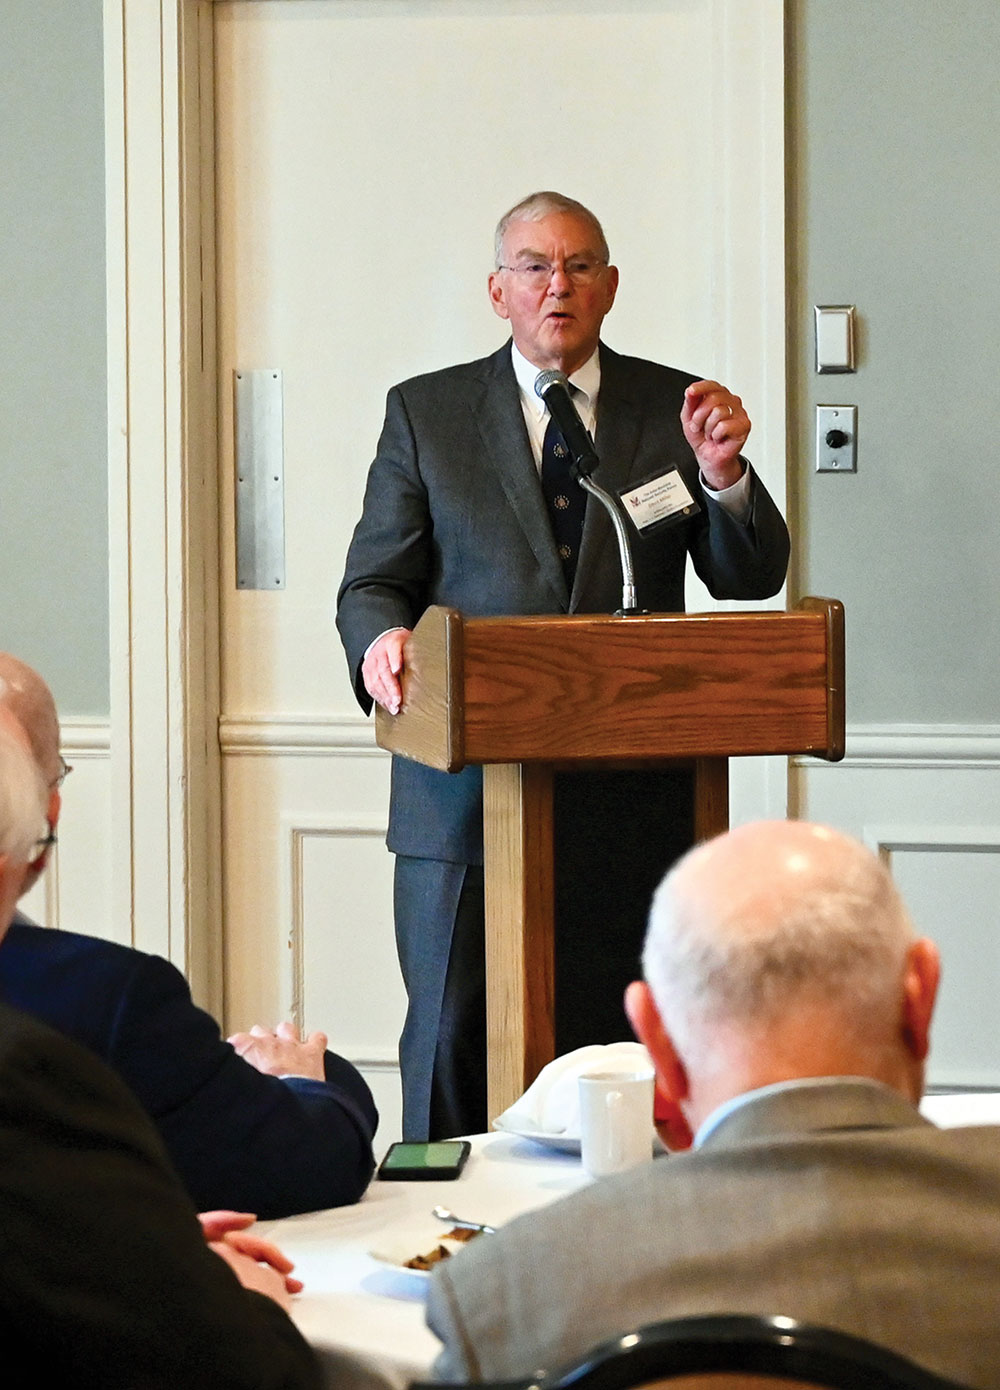 Ambassador (Ret.) David C. Miller, Jr, president of the U. S. Diplomatic Studies Foundation, discusses the private sector and diplomacy during the Arter-Rowland National Security Forum luncheon event on March 23, 2023, at the Carriage Club in Kansas City.